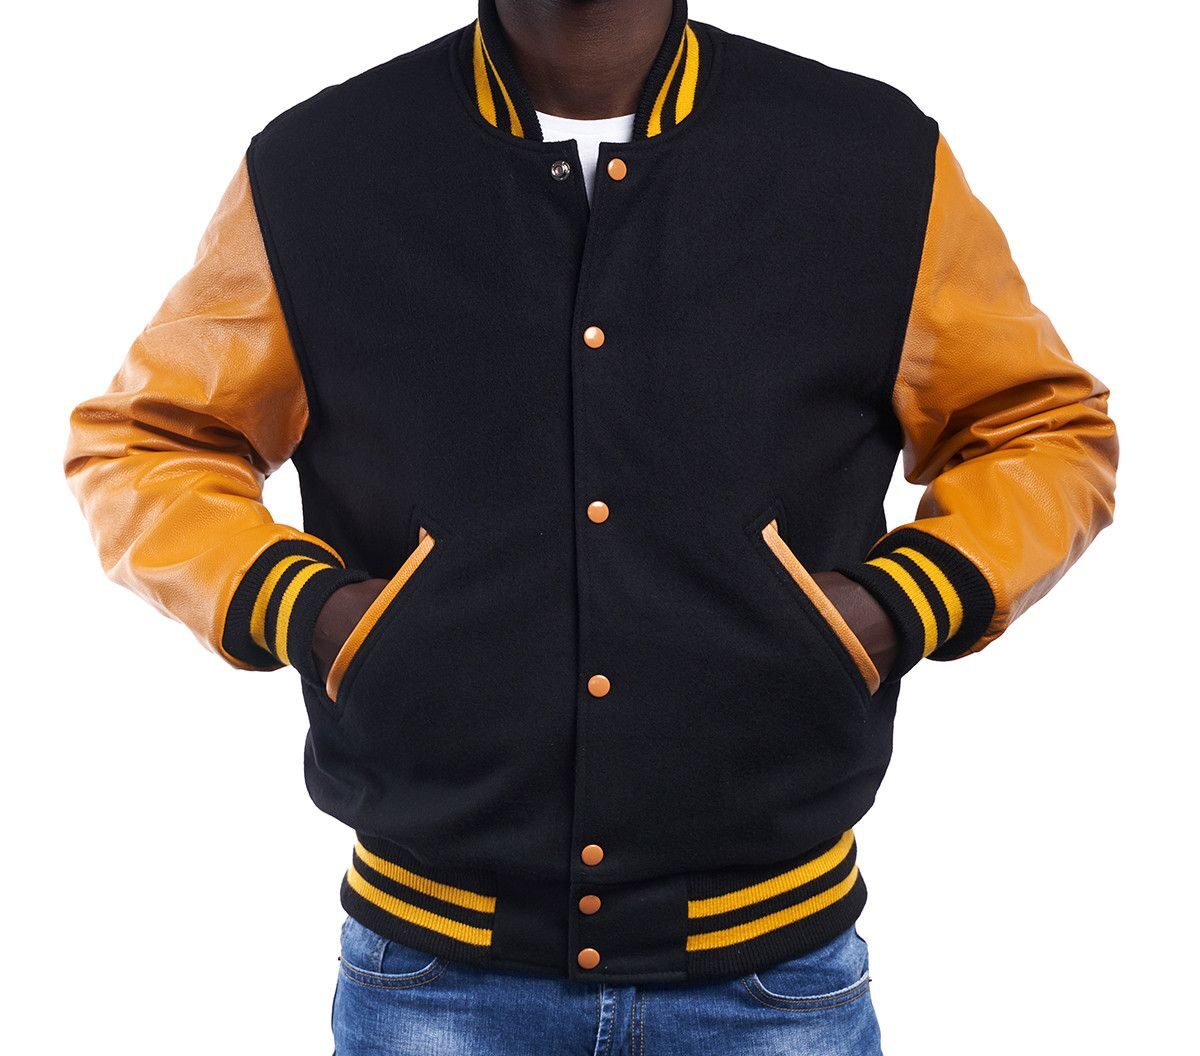 Varsity Jacket with Black Wool Body & Bright Gold Leather Sleeves ...